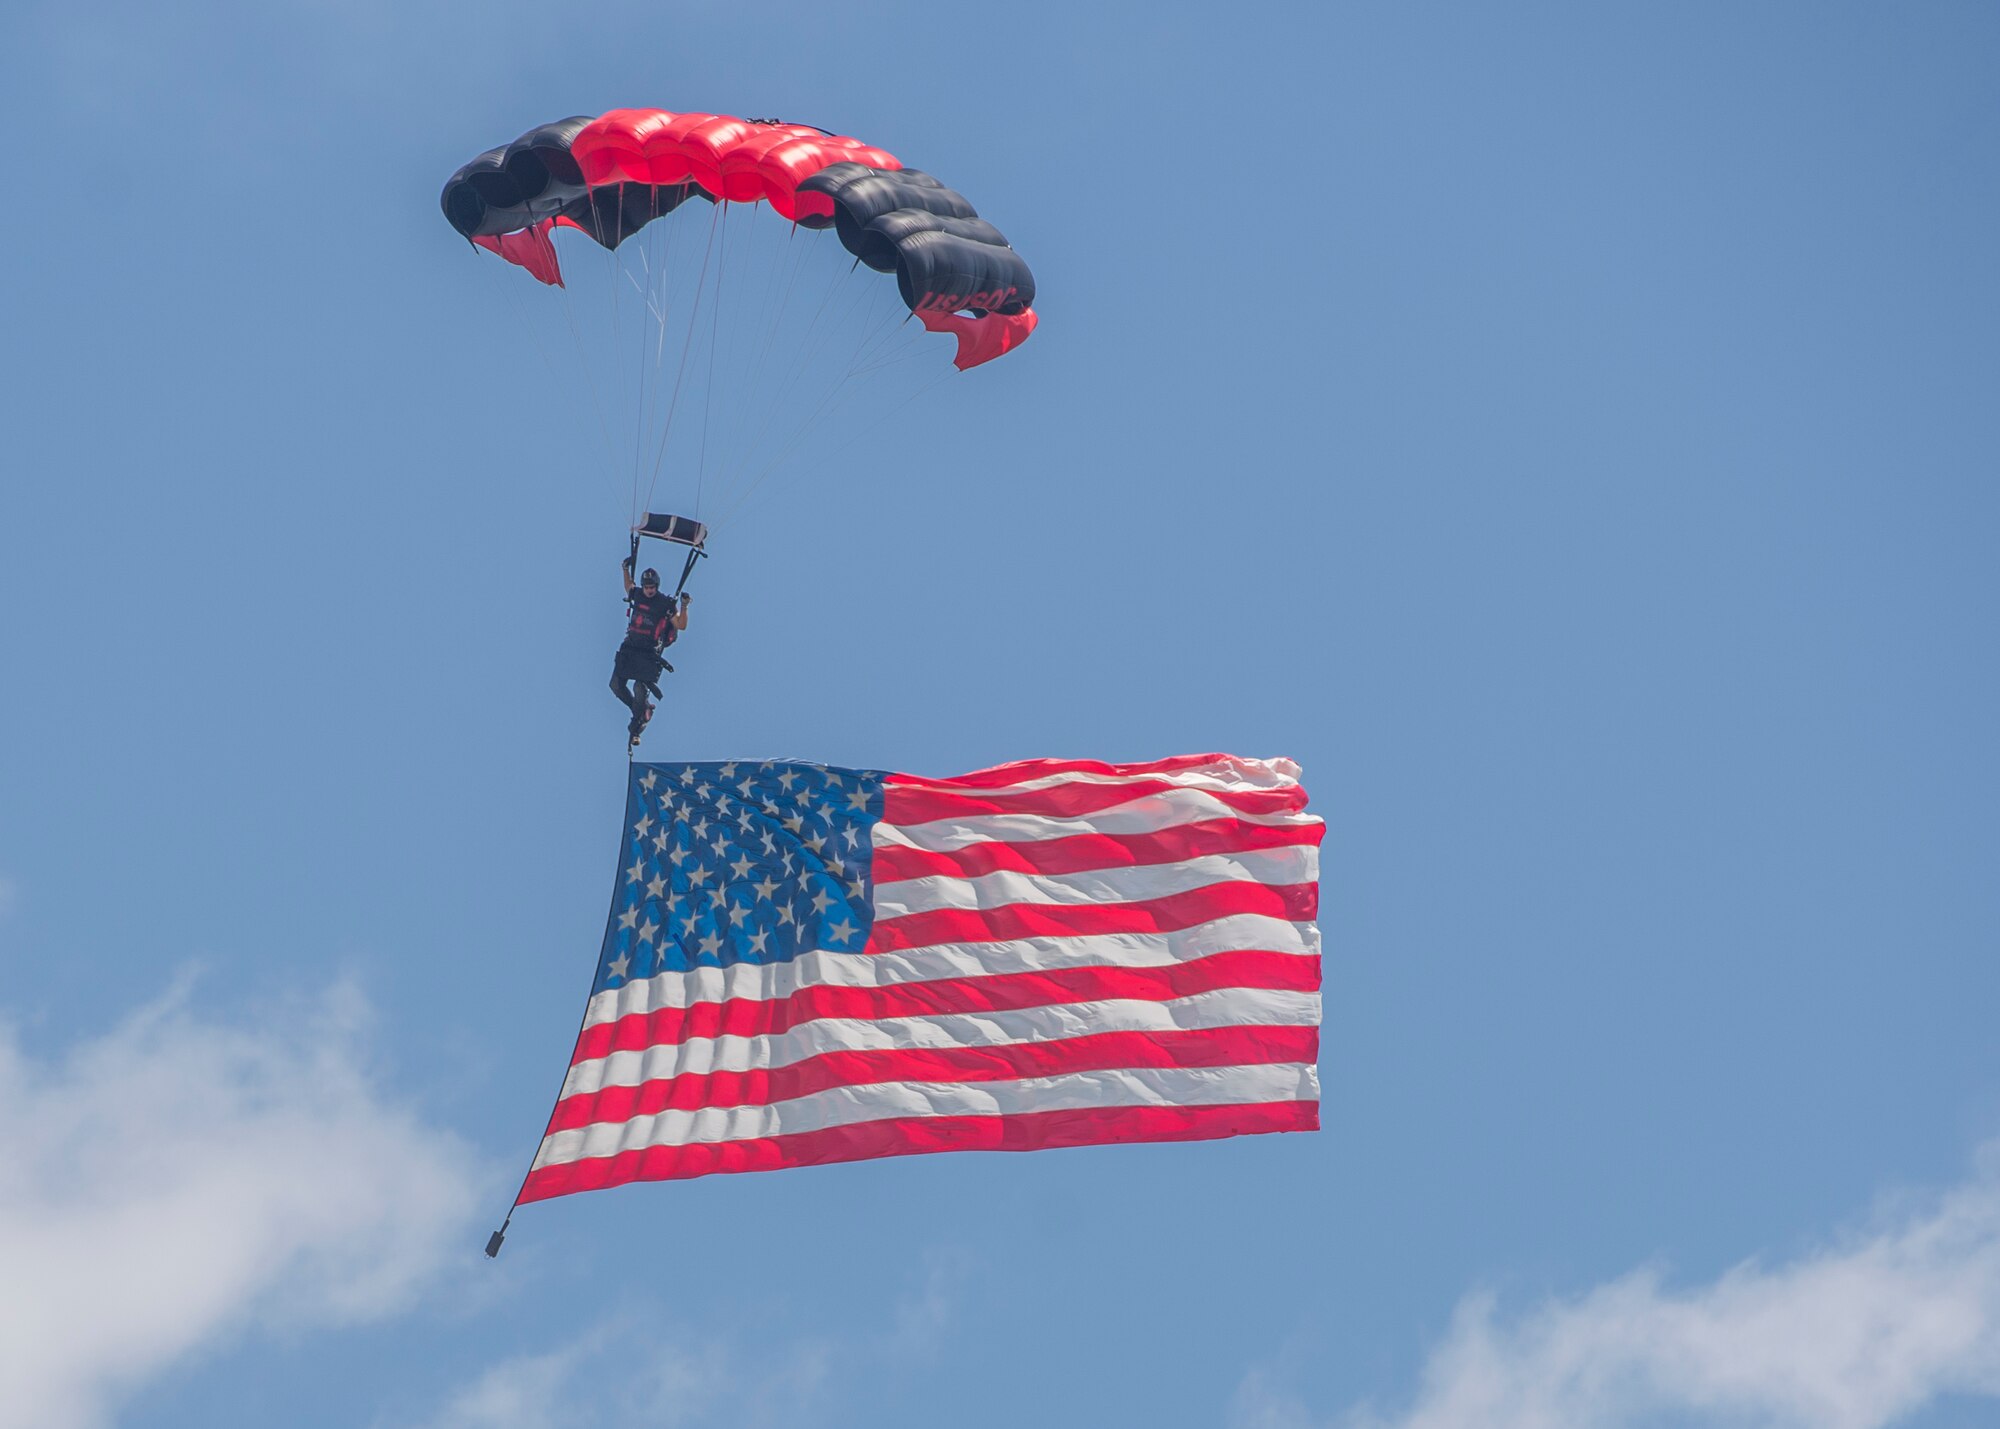 Members of the Black Daggers, the official U.S. Army Special Operations Command Parachute Demonstration Team, perform aerial stunts during Scott Air Force Base 2017 Air Show and Open House June 11, which celebrates the base’s 100th anniversary.  Black Daggers are highly trained Soldiers who insert themselves behind enemy lines to disrupt the movement of enemy troops and supplies to the front lines.  They frequently use parachutes to infiltrate without being detected. (Air Force photo by Airman 1st Class Daniel Garcia)